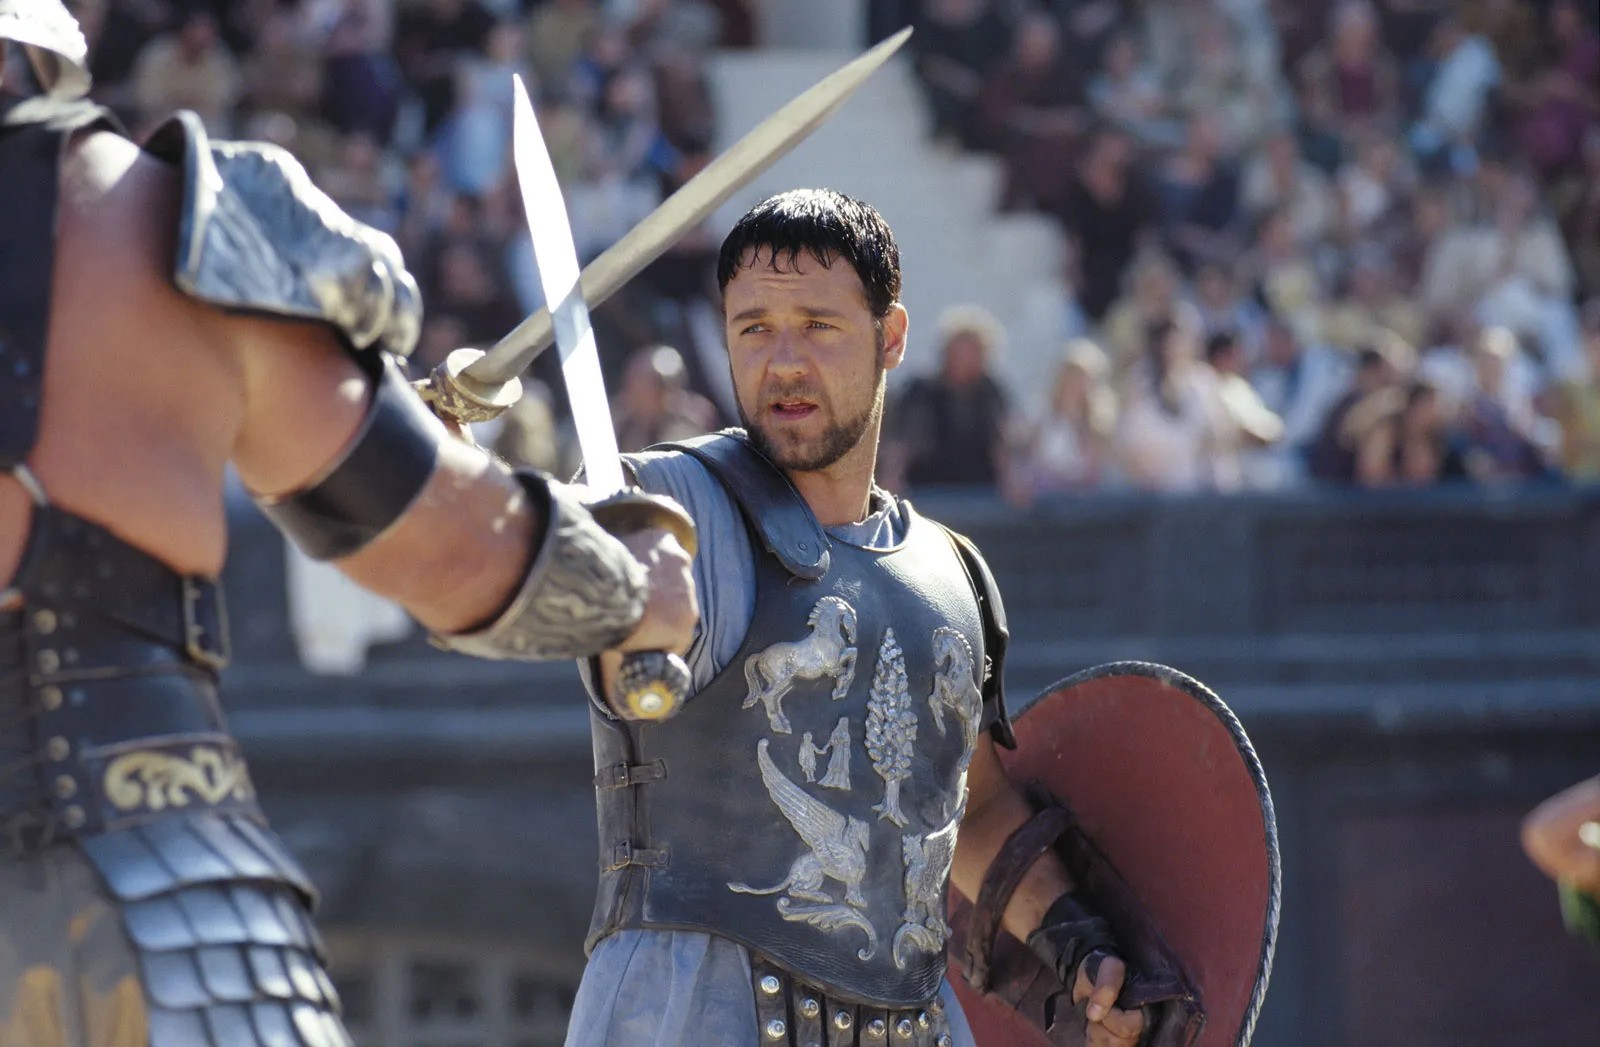 Gladiator had some inrtnse action seequences ivolvng Russell Crowe and many warriors | DreamWorks Distribution